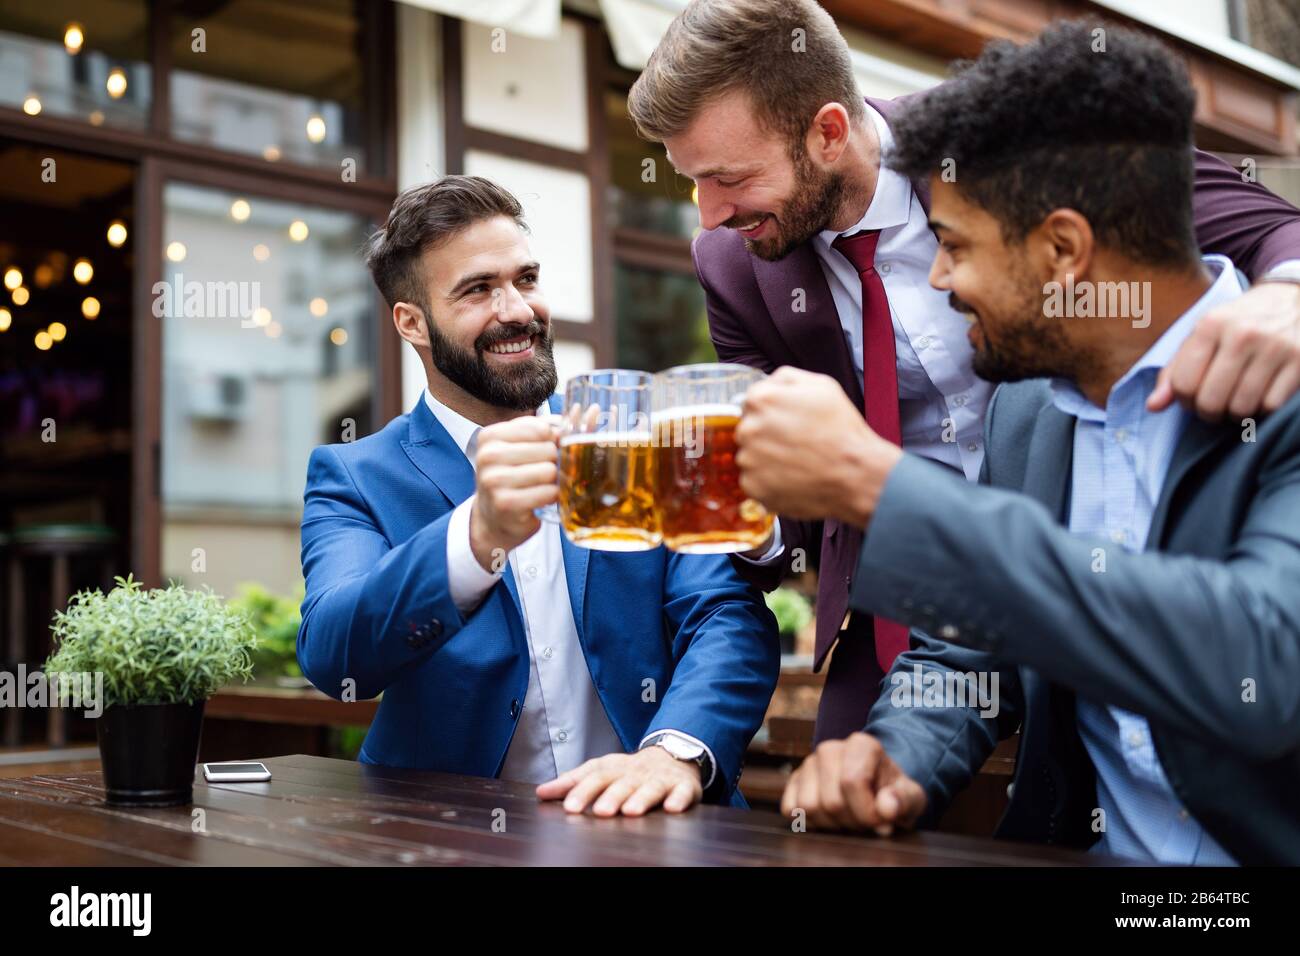 People, men, leisure, friendship and celebration concept. Happy male friends drinking beer at pub Stock Photo